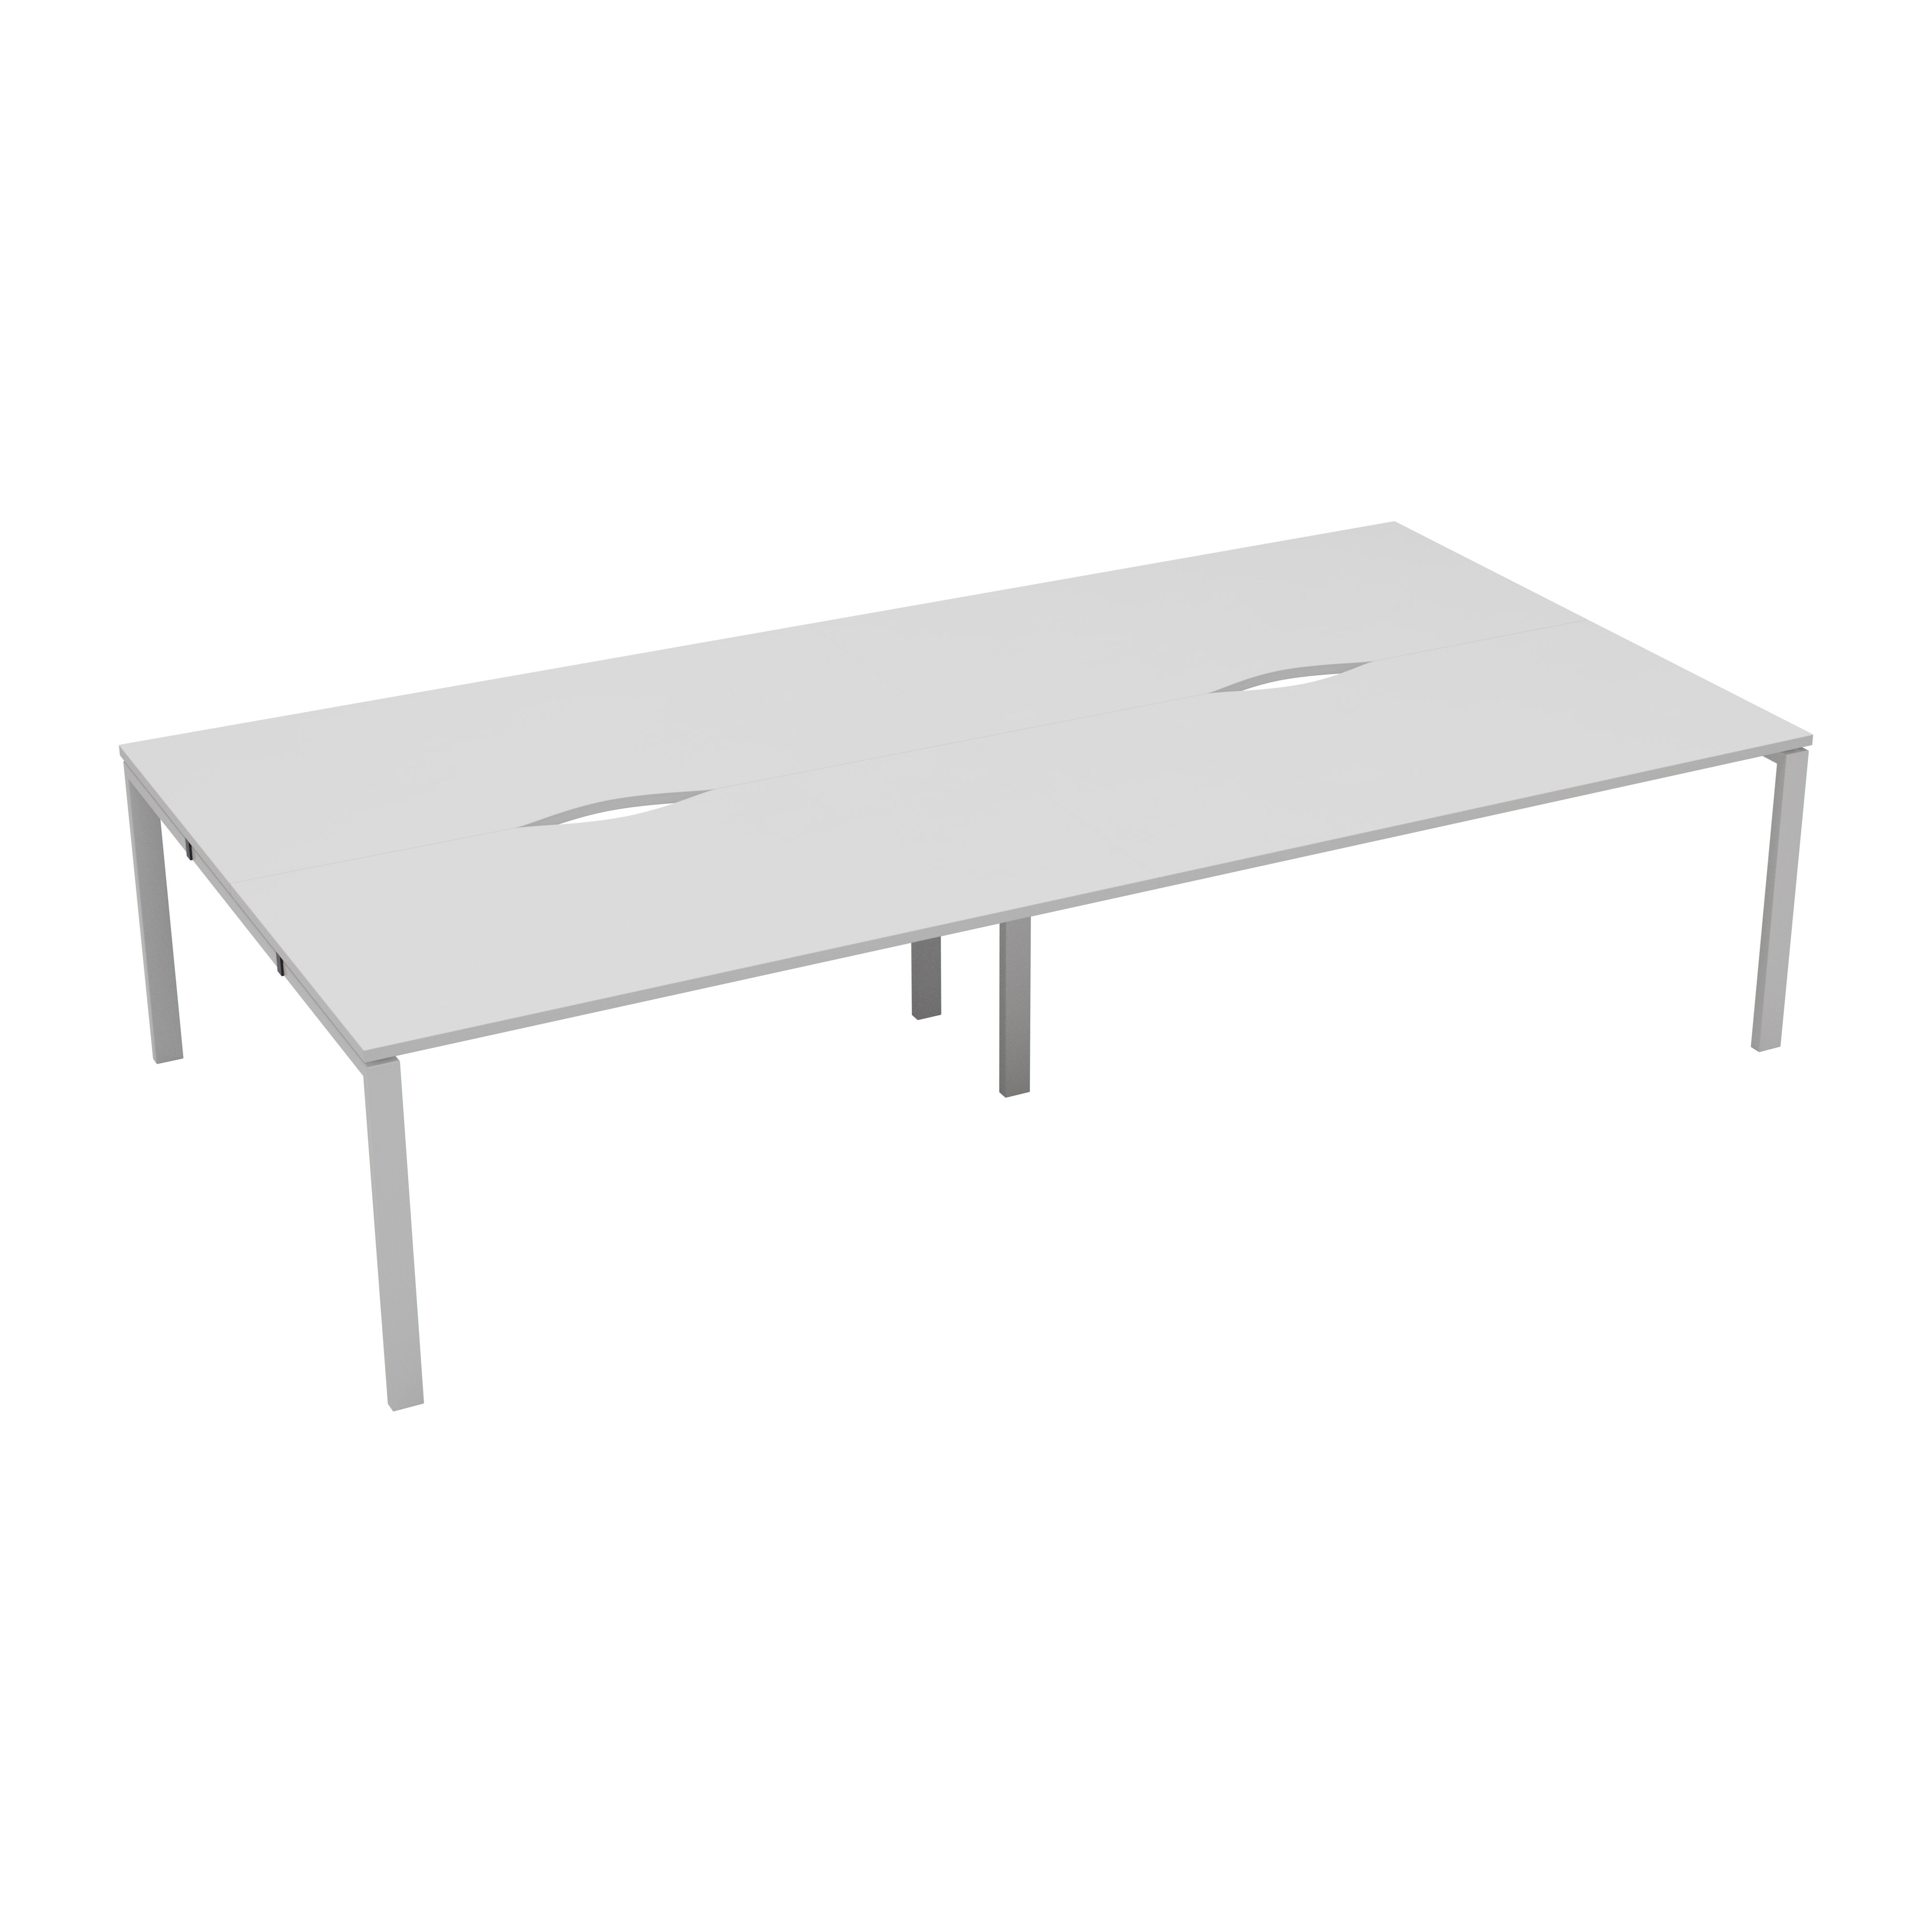 CB 4 Person Bench 1600 x 800 - White Top and White Legs